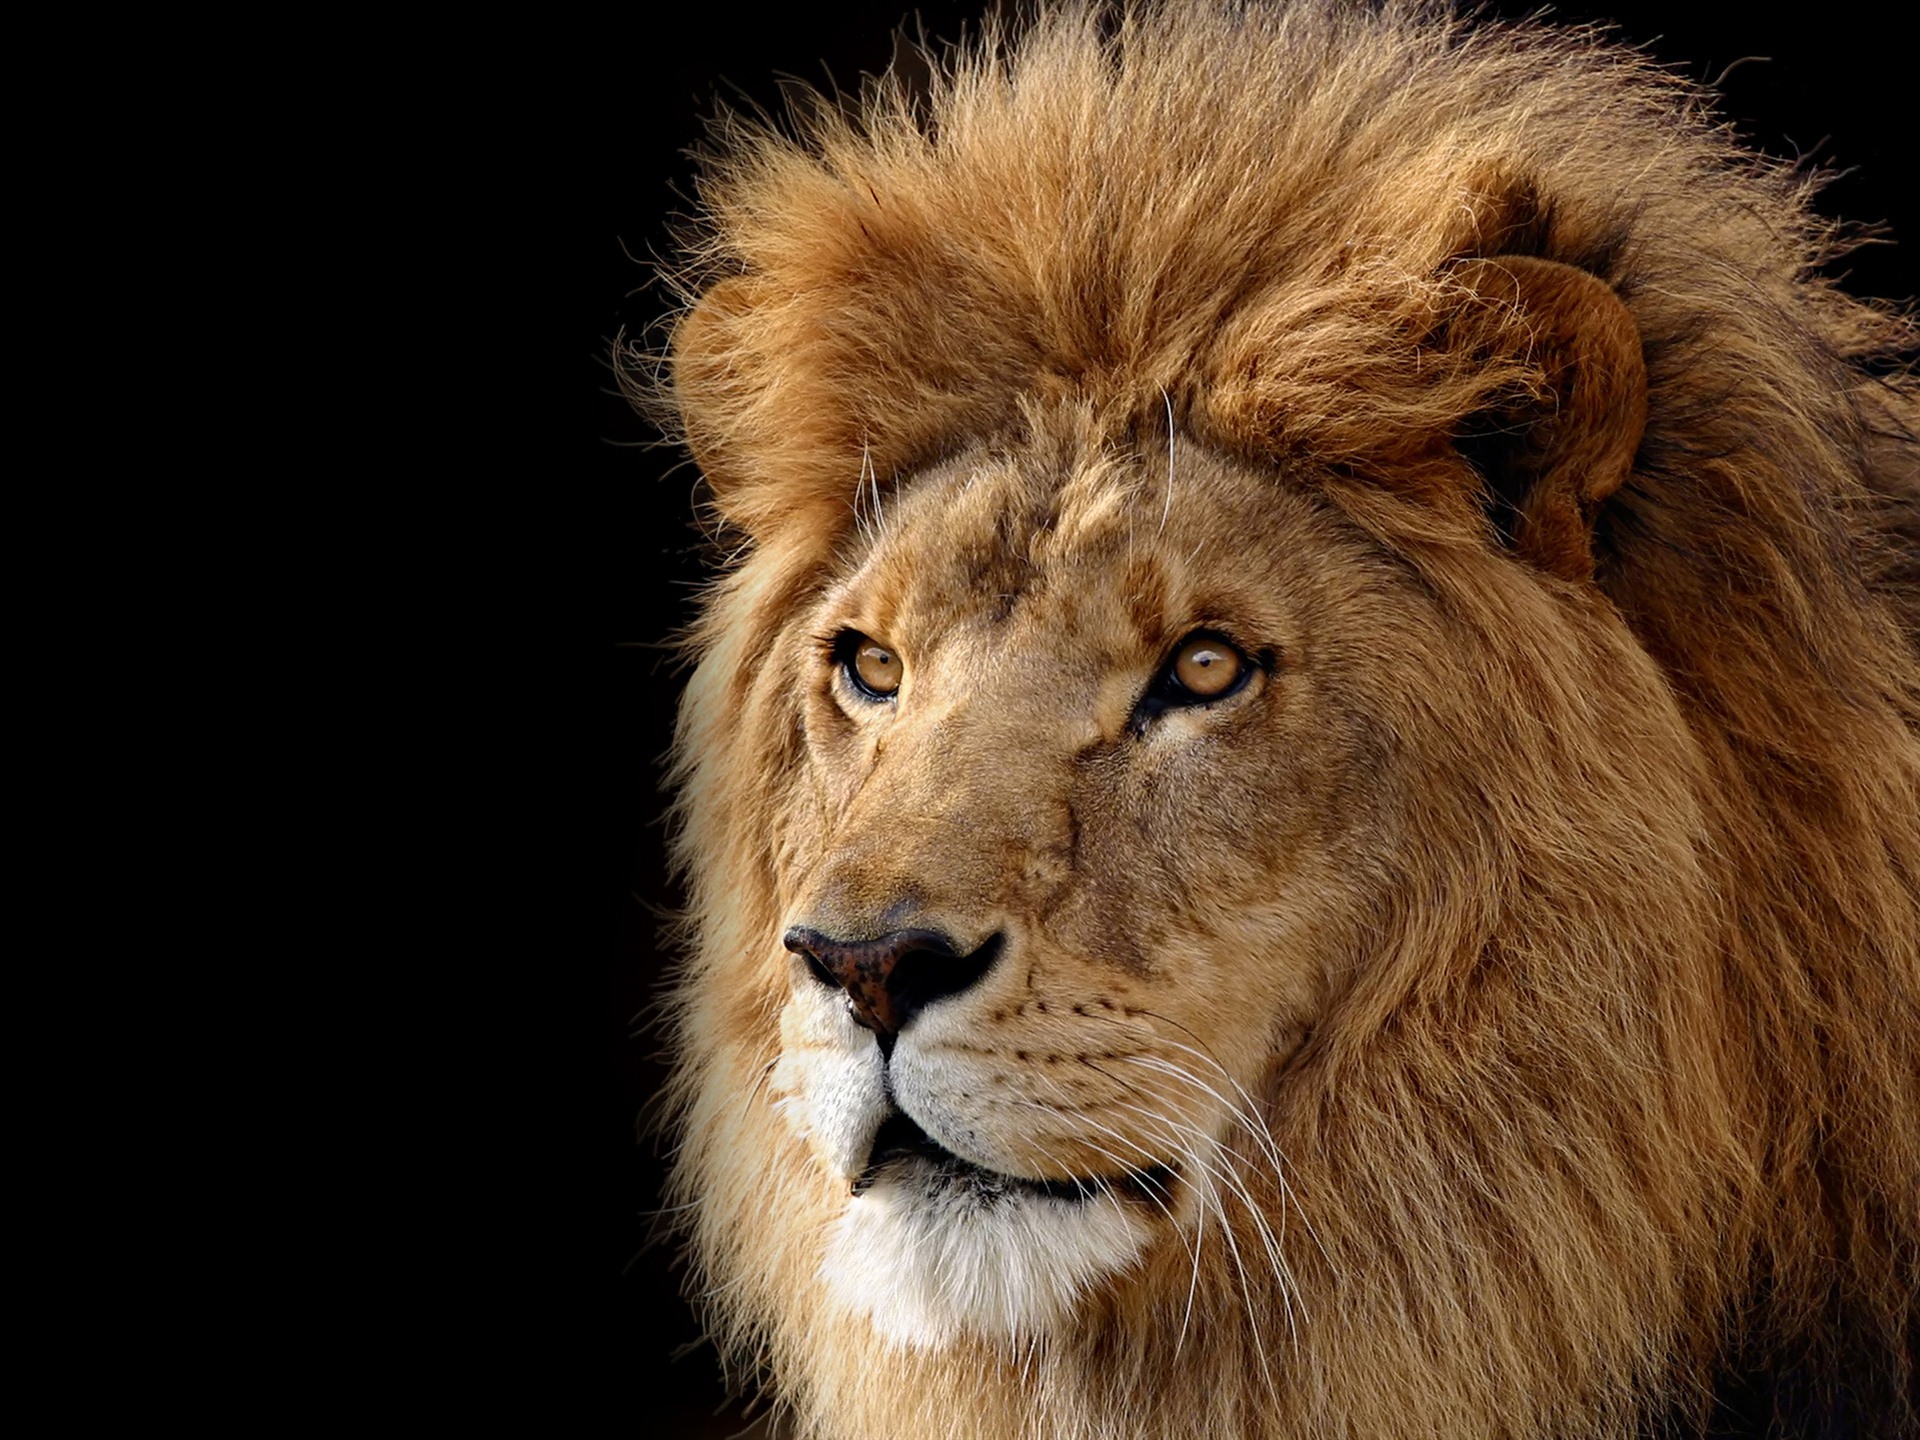 Mac OS X the Lion Apple systems official HD wallpapers #14 - 1920x1440